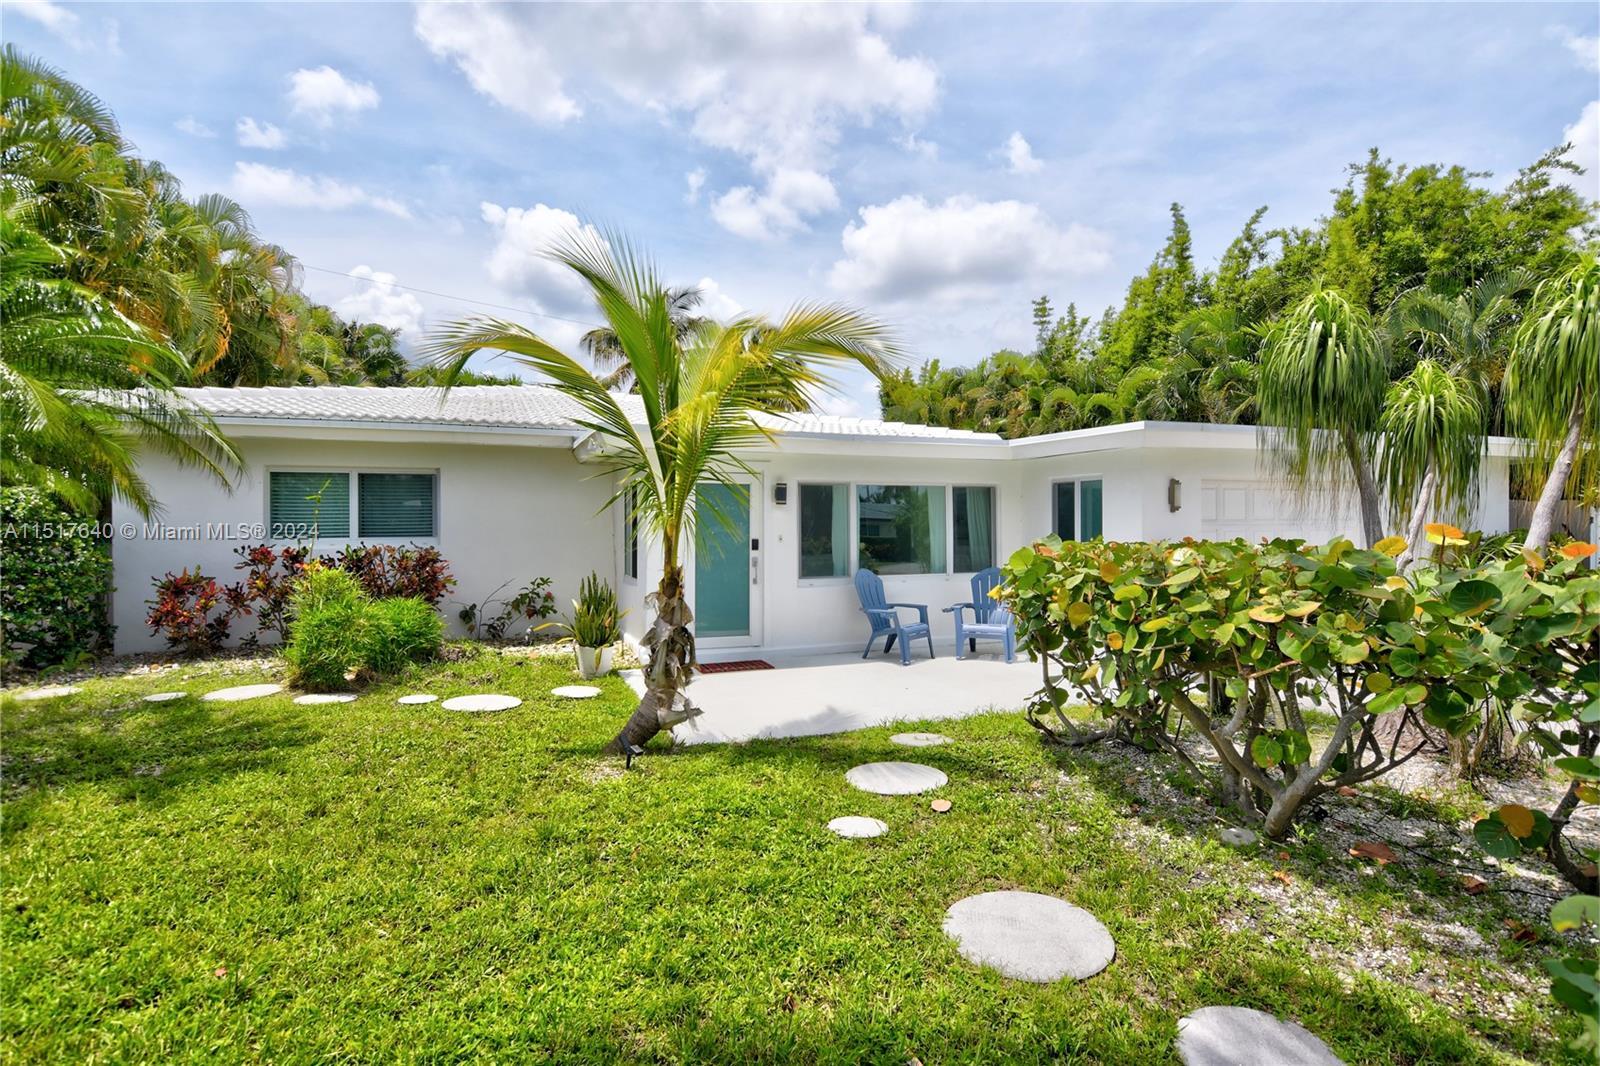 Photo of 262 Bombay Ave in Lauderdale By The Sea, FL